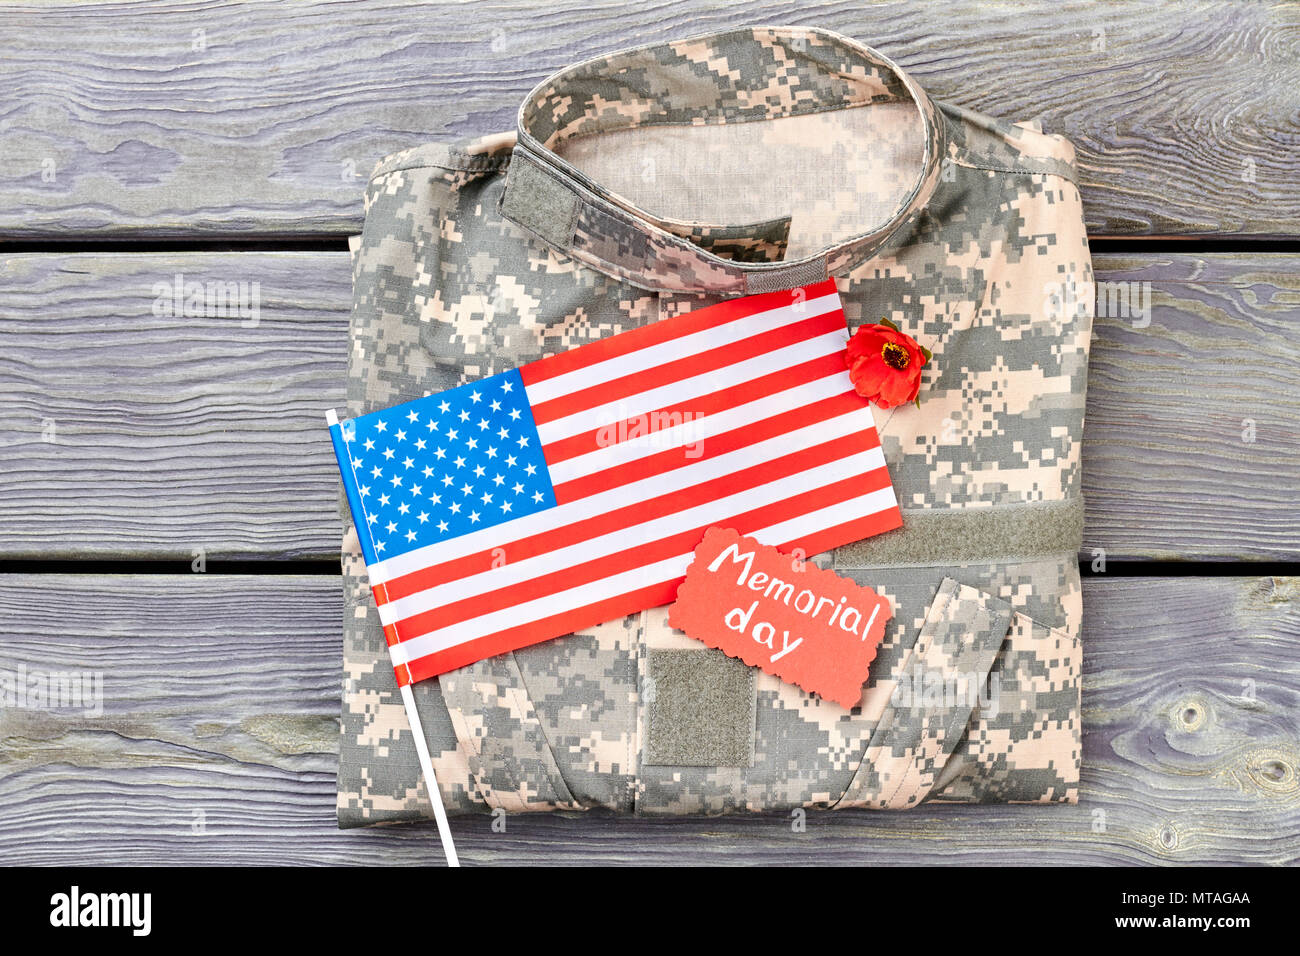 Camouflage jacket american flag and red poppy. Memorial day, patriotic accessories. Stock Photo